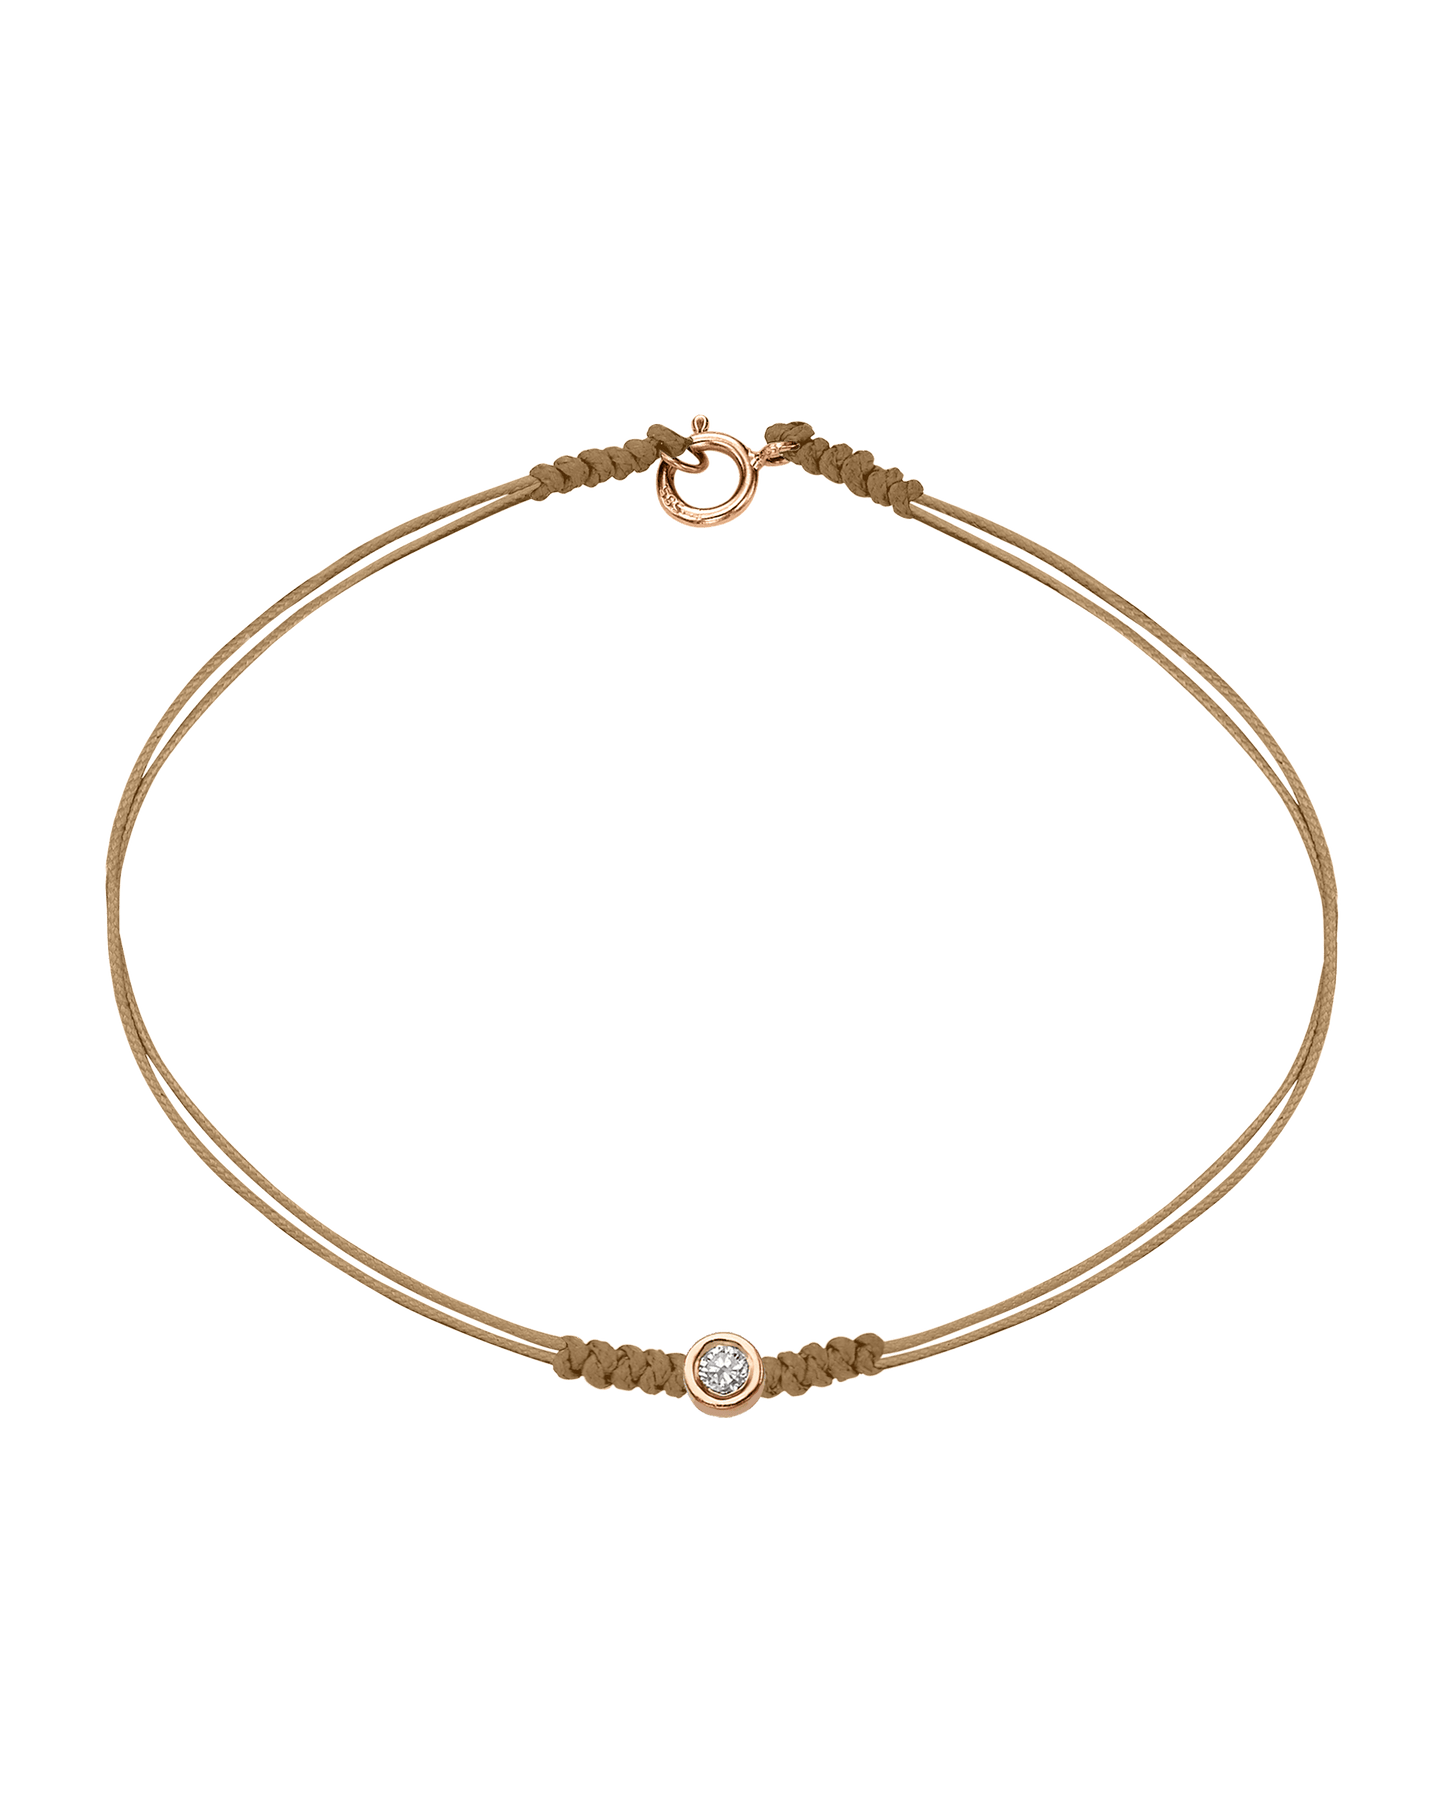 The Classic String of Love with clasp - 14K Rose Gold Bracelets 14K Solid Gold Camel Medium: 0.04ct Small - 6 Inches (15.5cm)